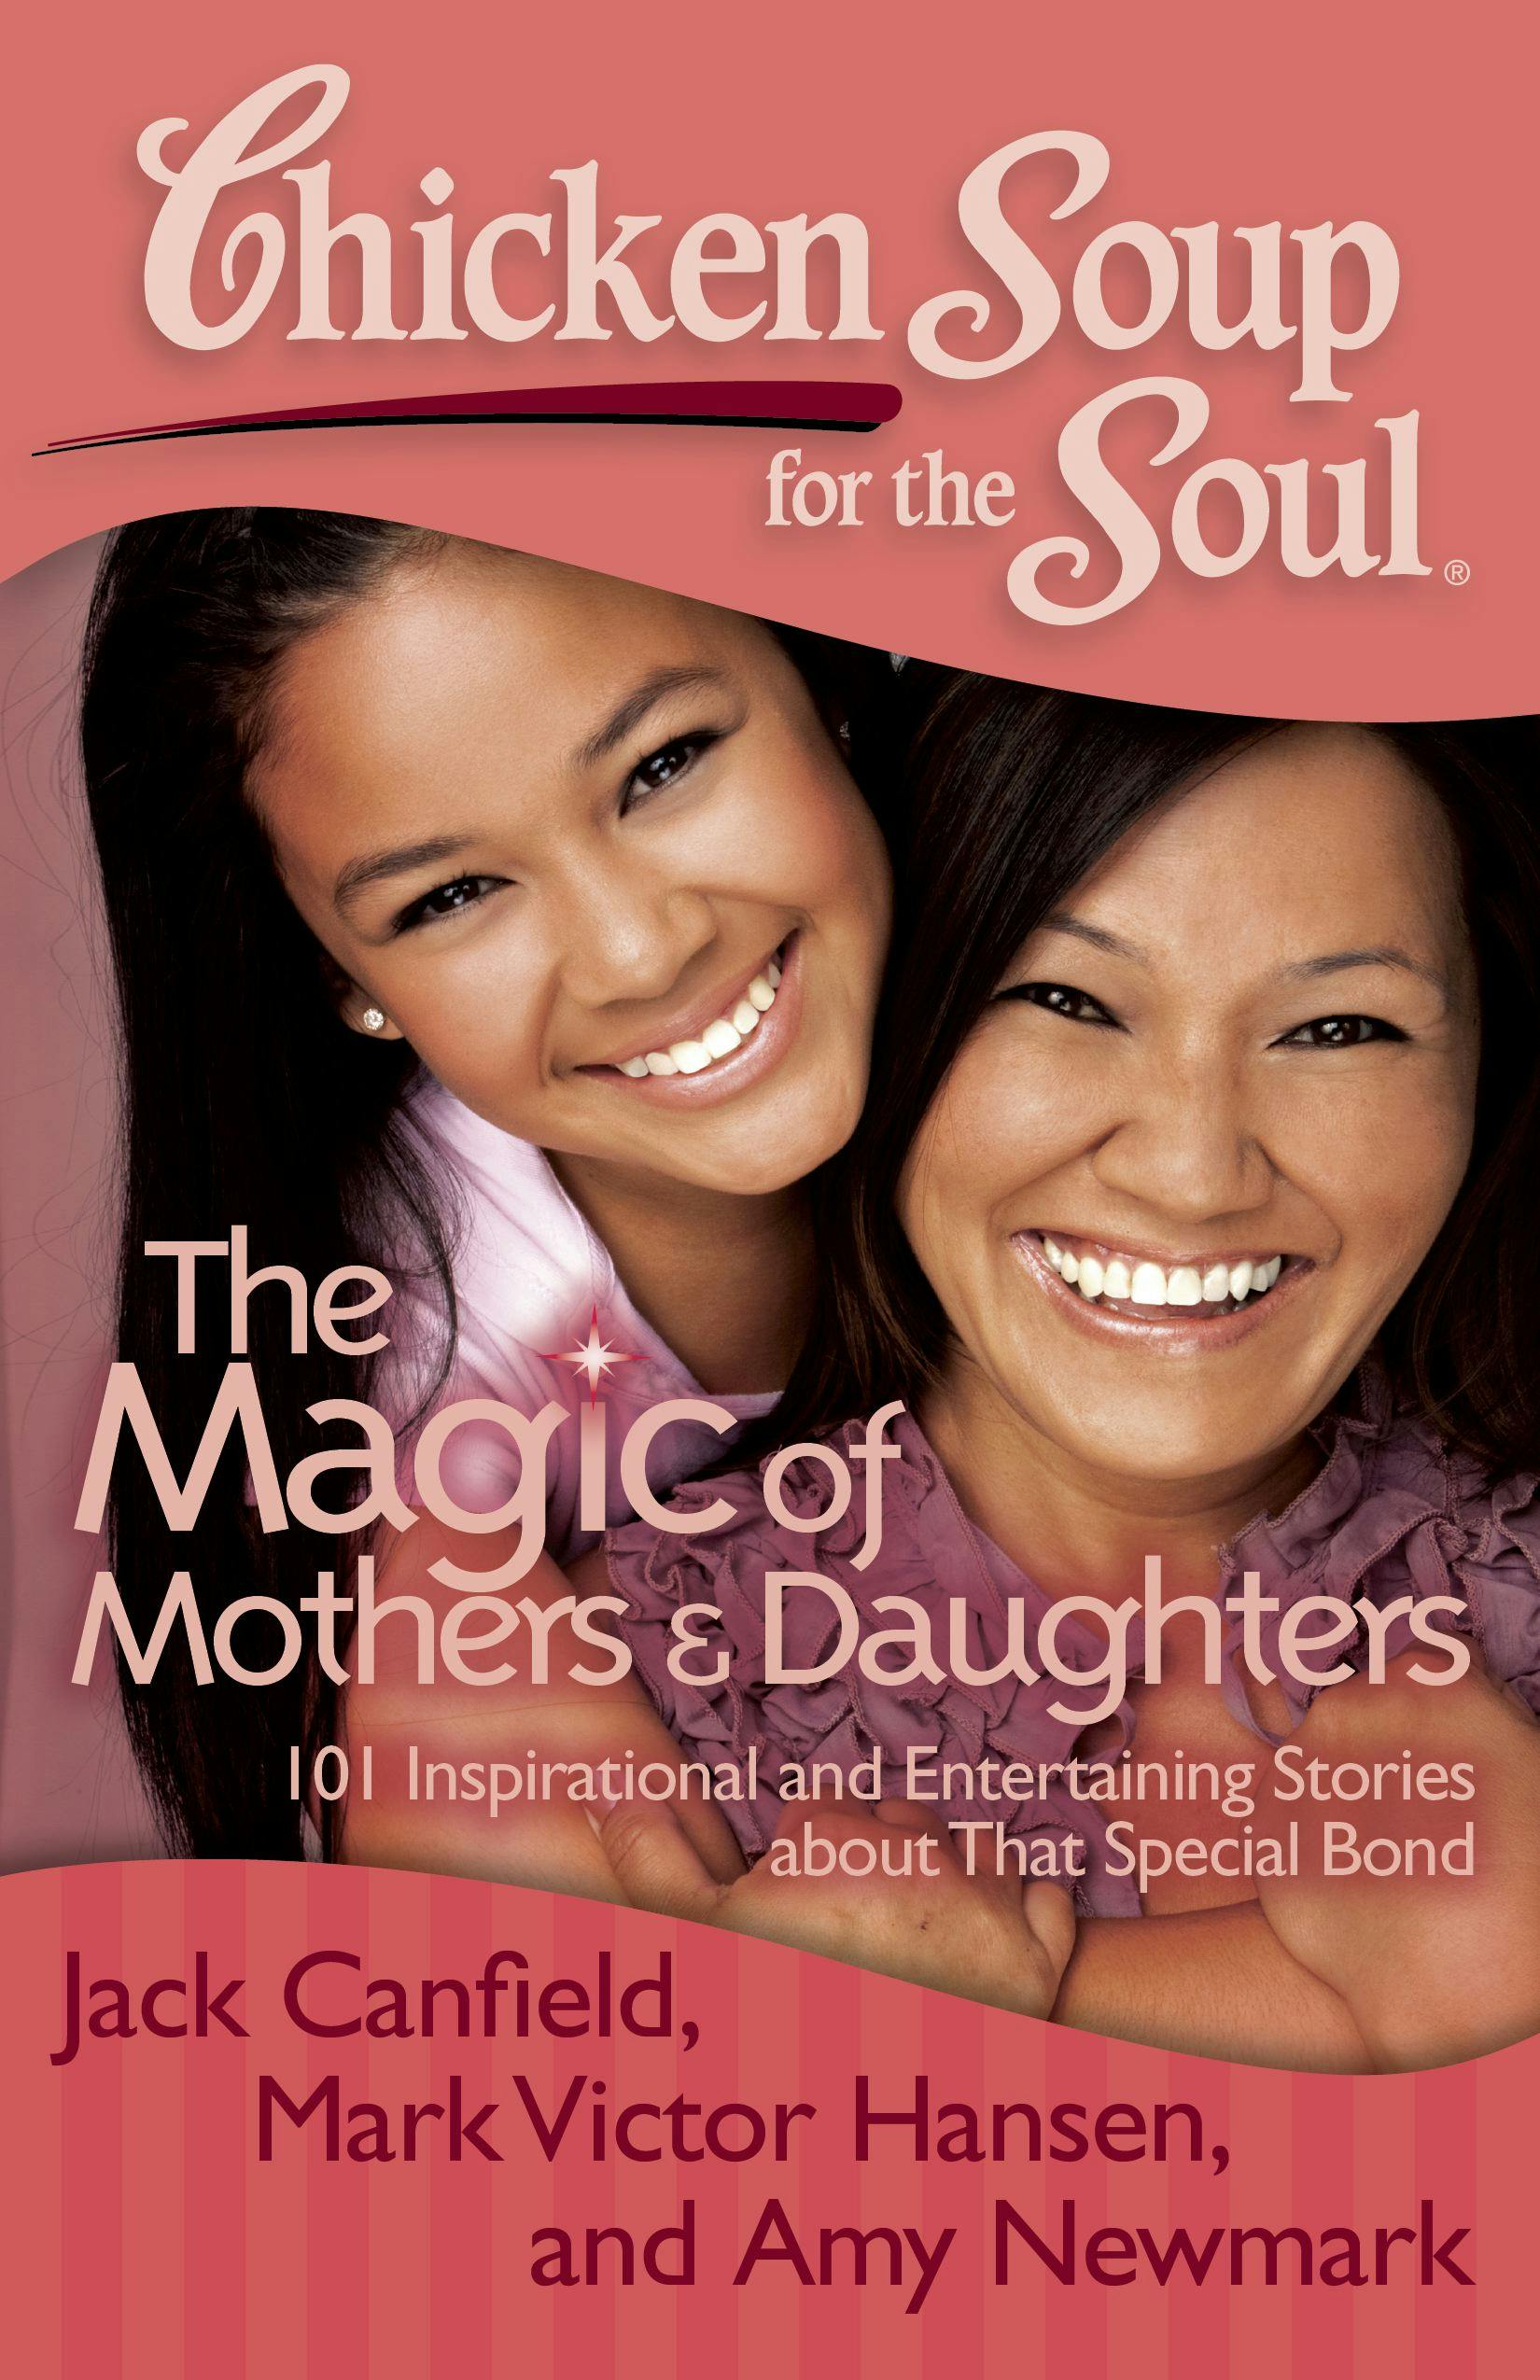 Chicken Soup for the Soul: The Magic of Mothers & Daughters: 101 Inspirational and Entertaining Stories about That Special Bond - Mark Victor Hansen, Jack Canfield, Amy Newmark